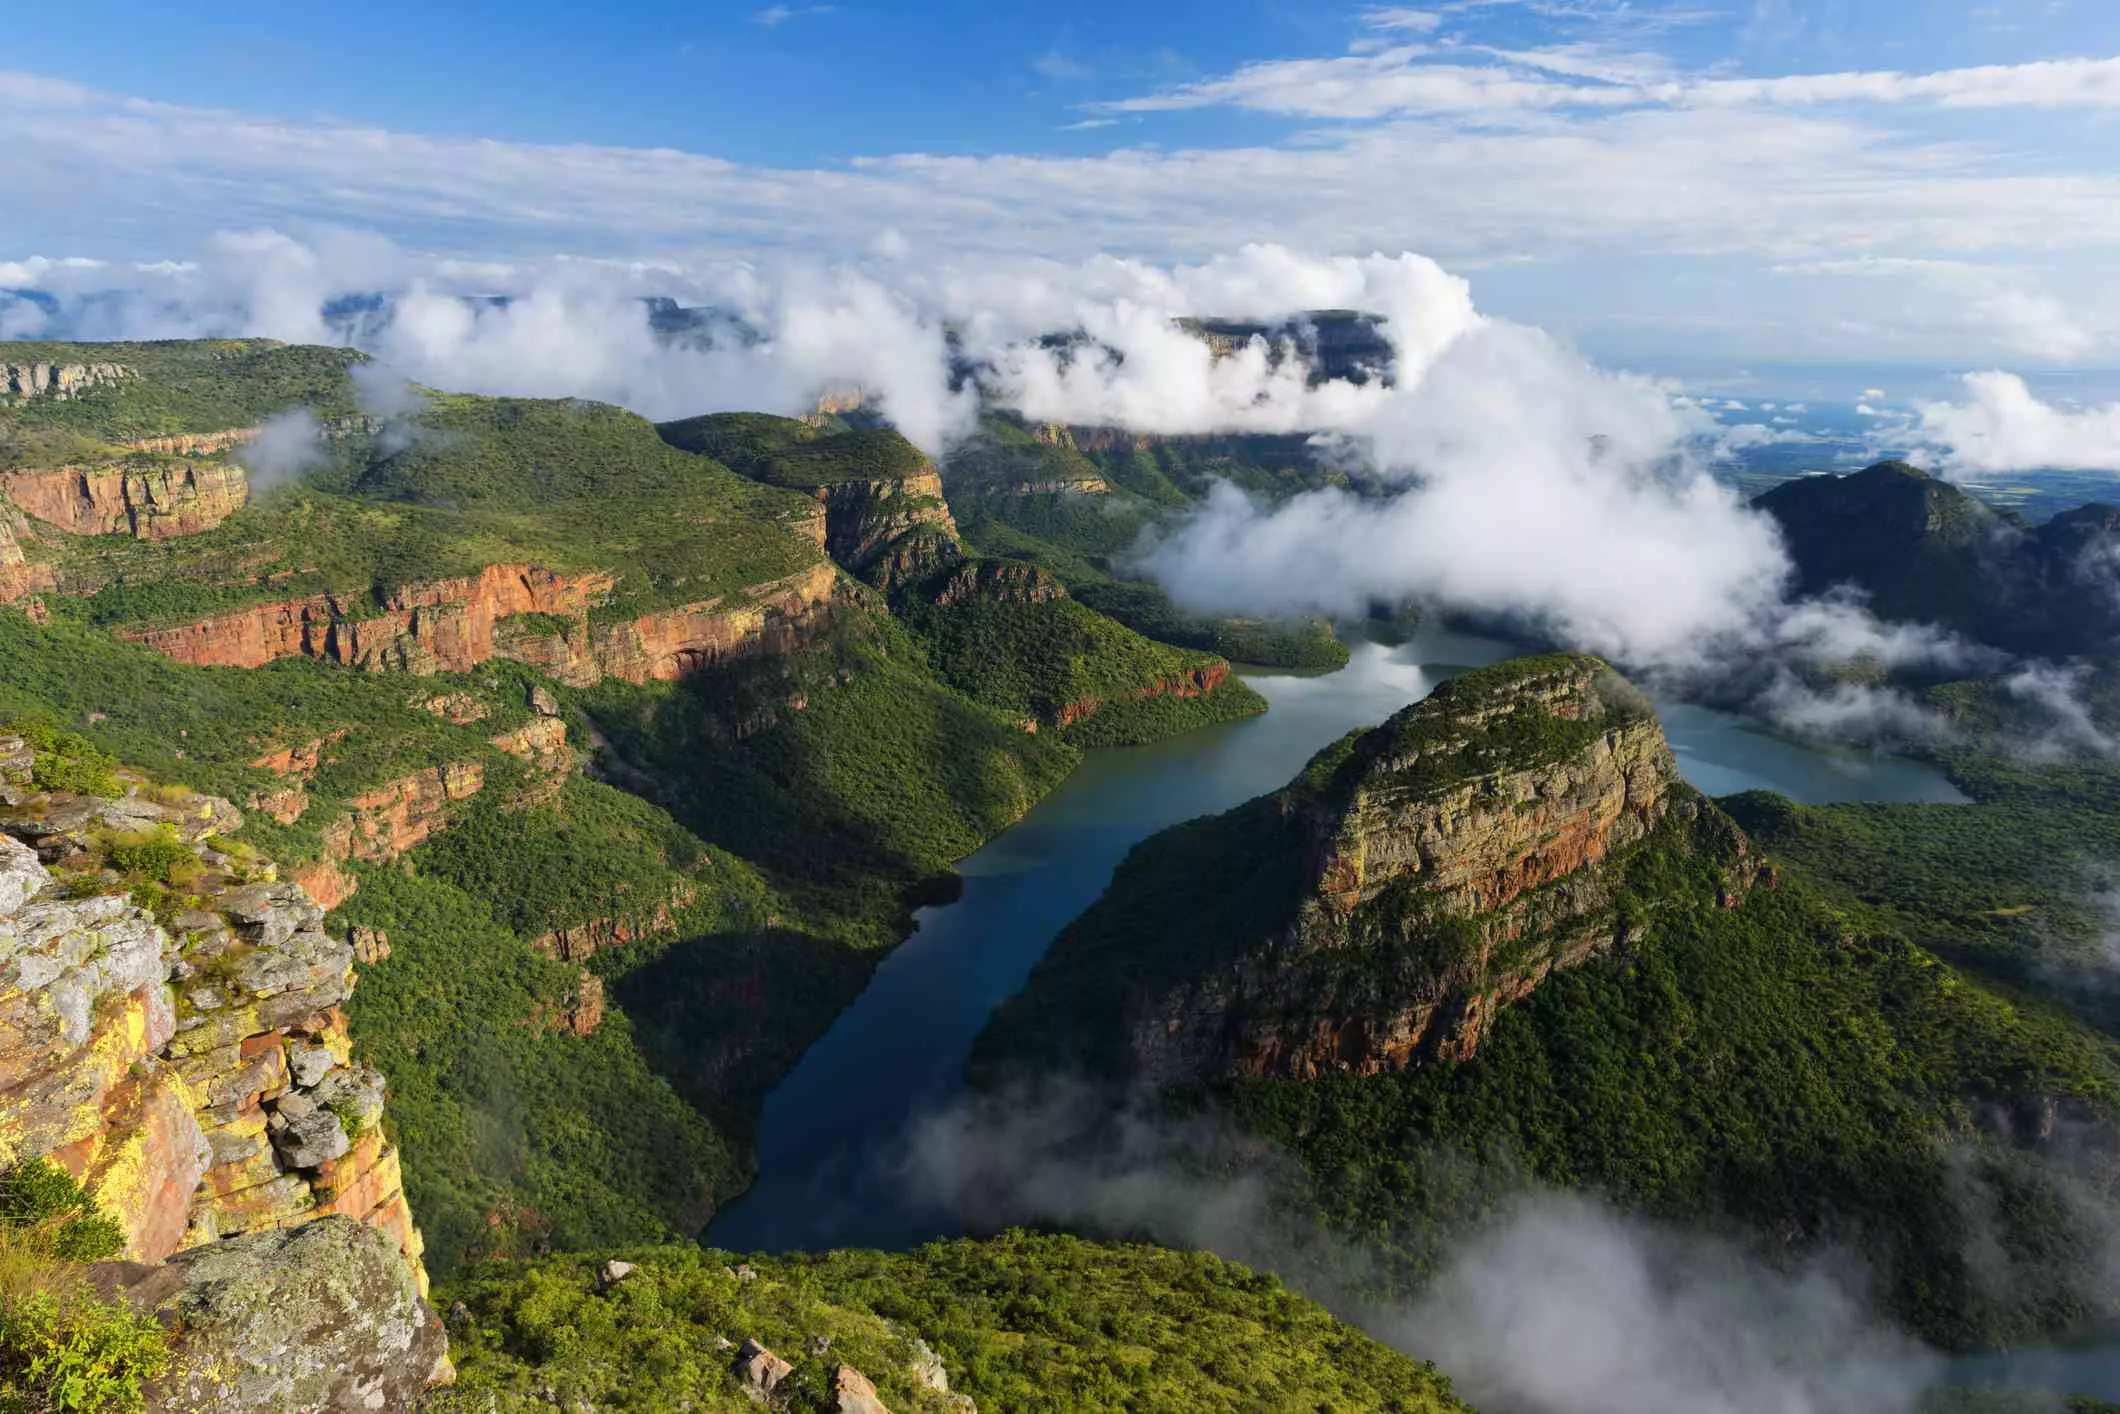 Blyderivierspoort Hiking Trail in South Africa, Africa | Trekking & Hiking - Rated 0.8